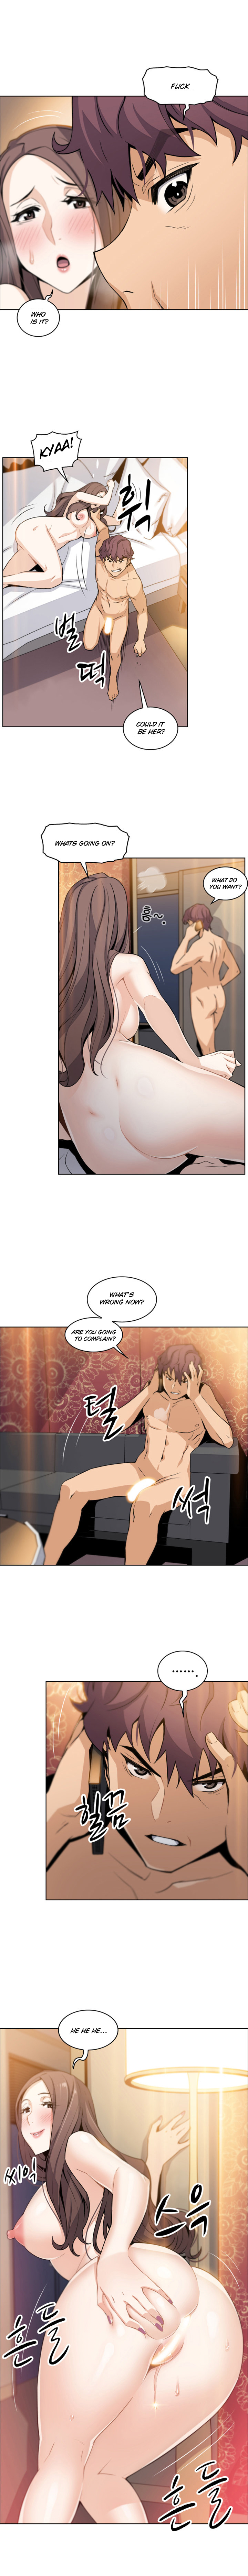 Housekeeper Manhwa - Chapter 9 Page 11